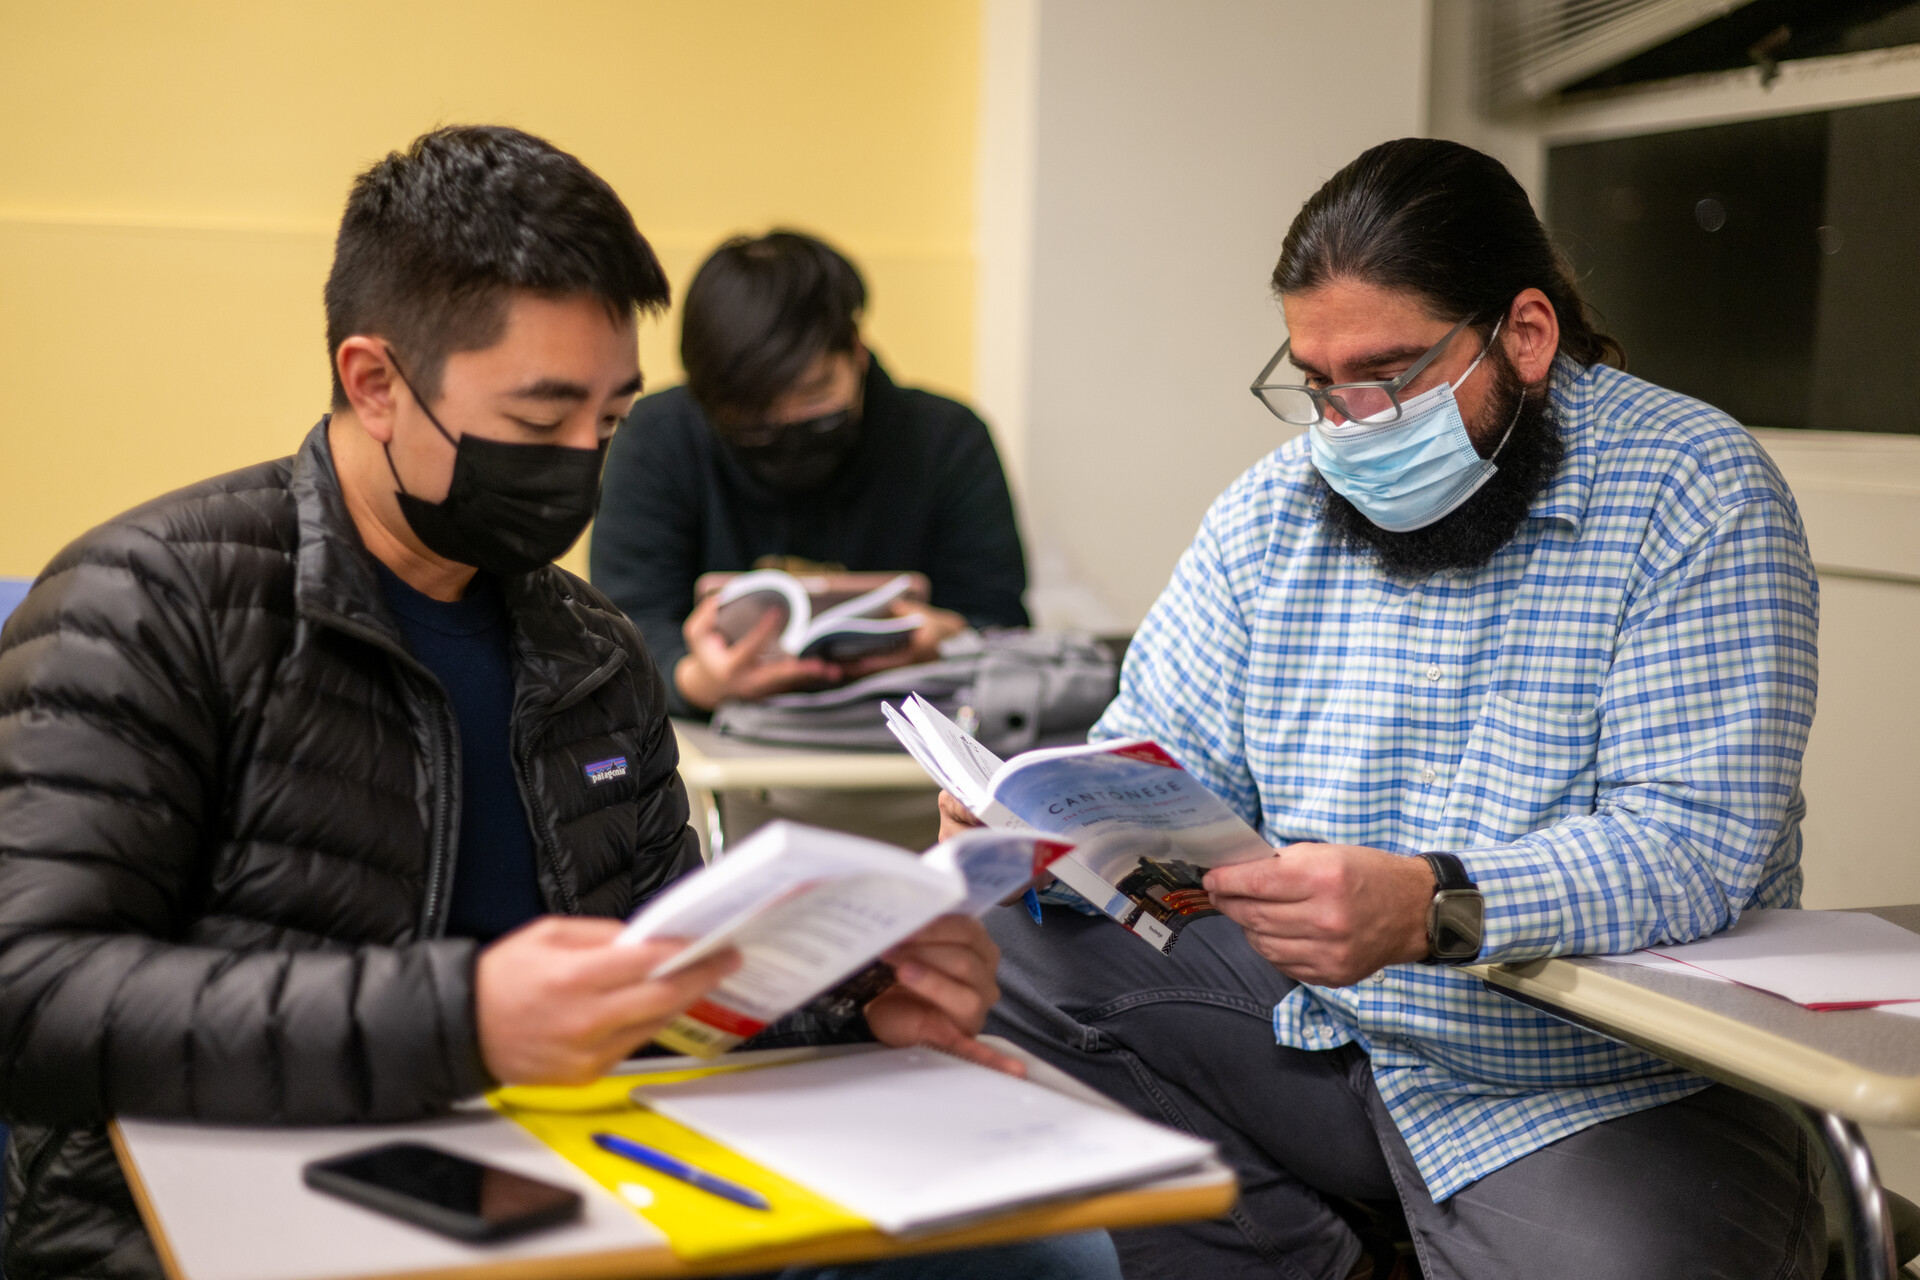 Two men wearing facemasks, one who appears to be Asian and one who appears to be white, face each other and hold school books while seated in a classroom setting